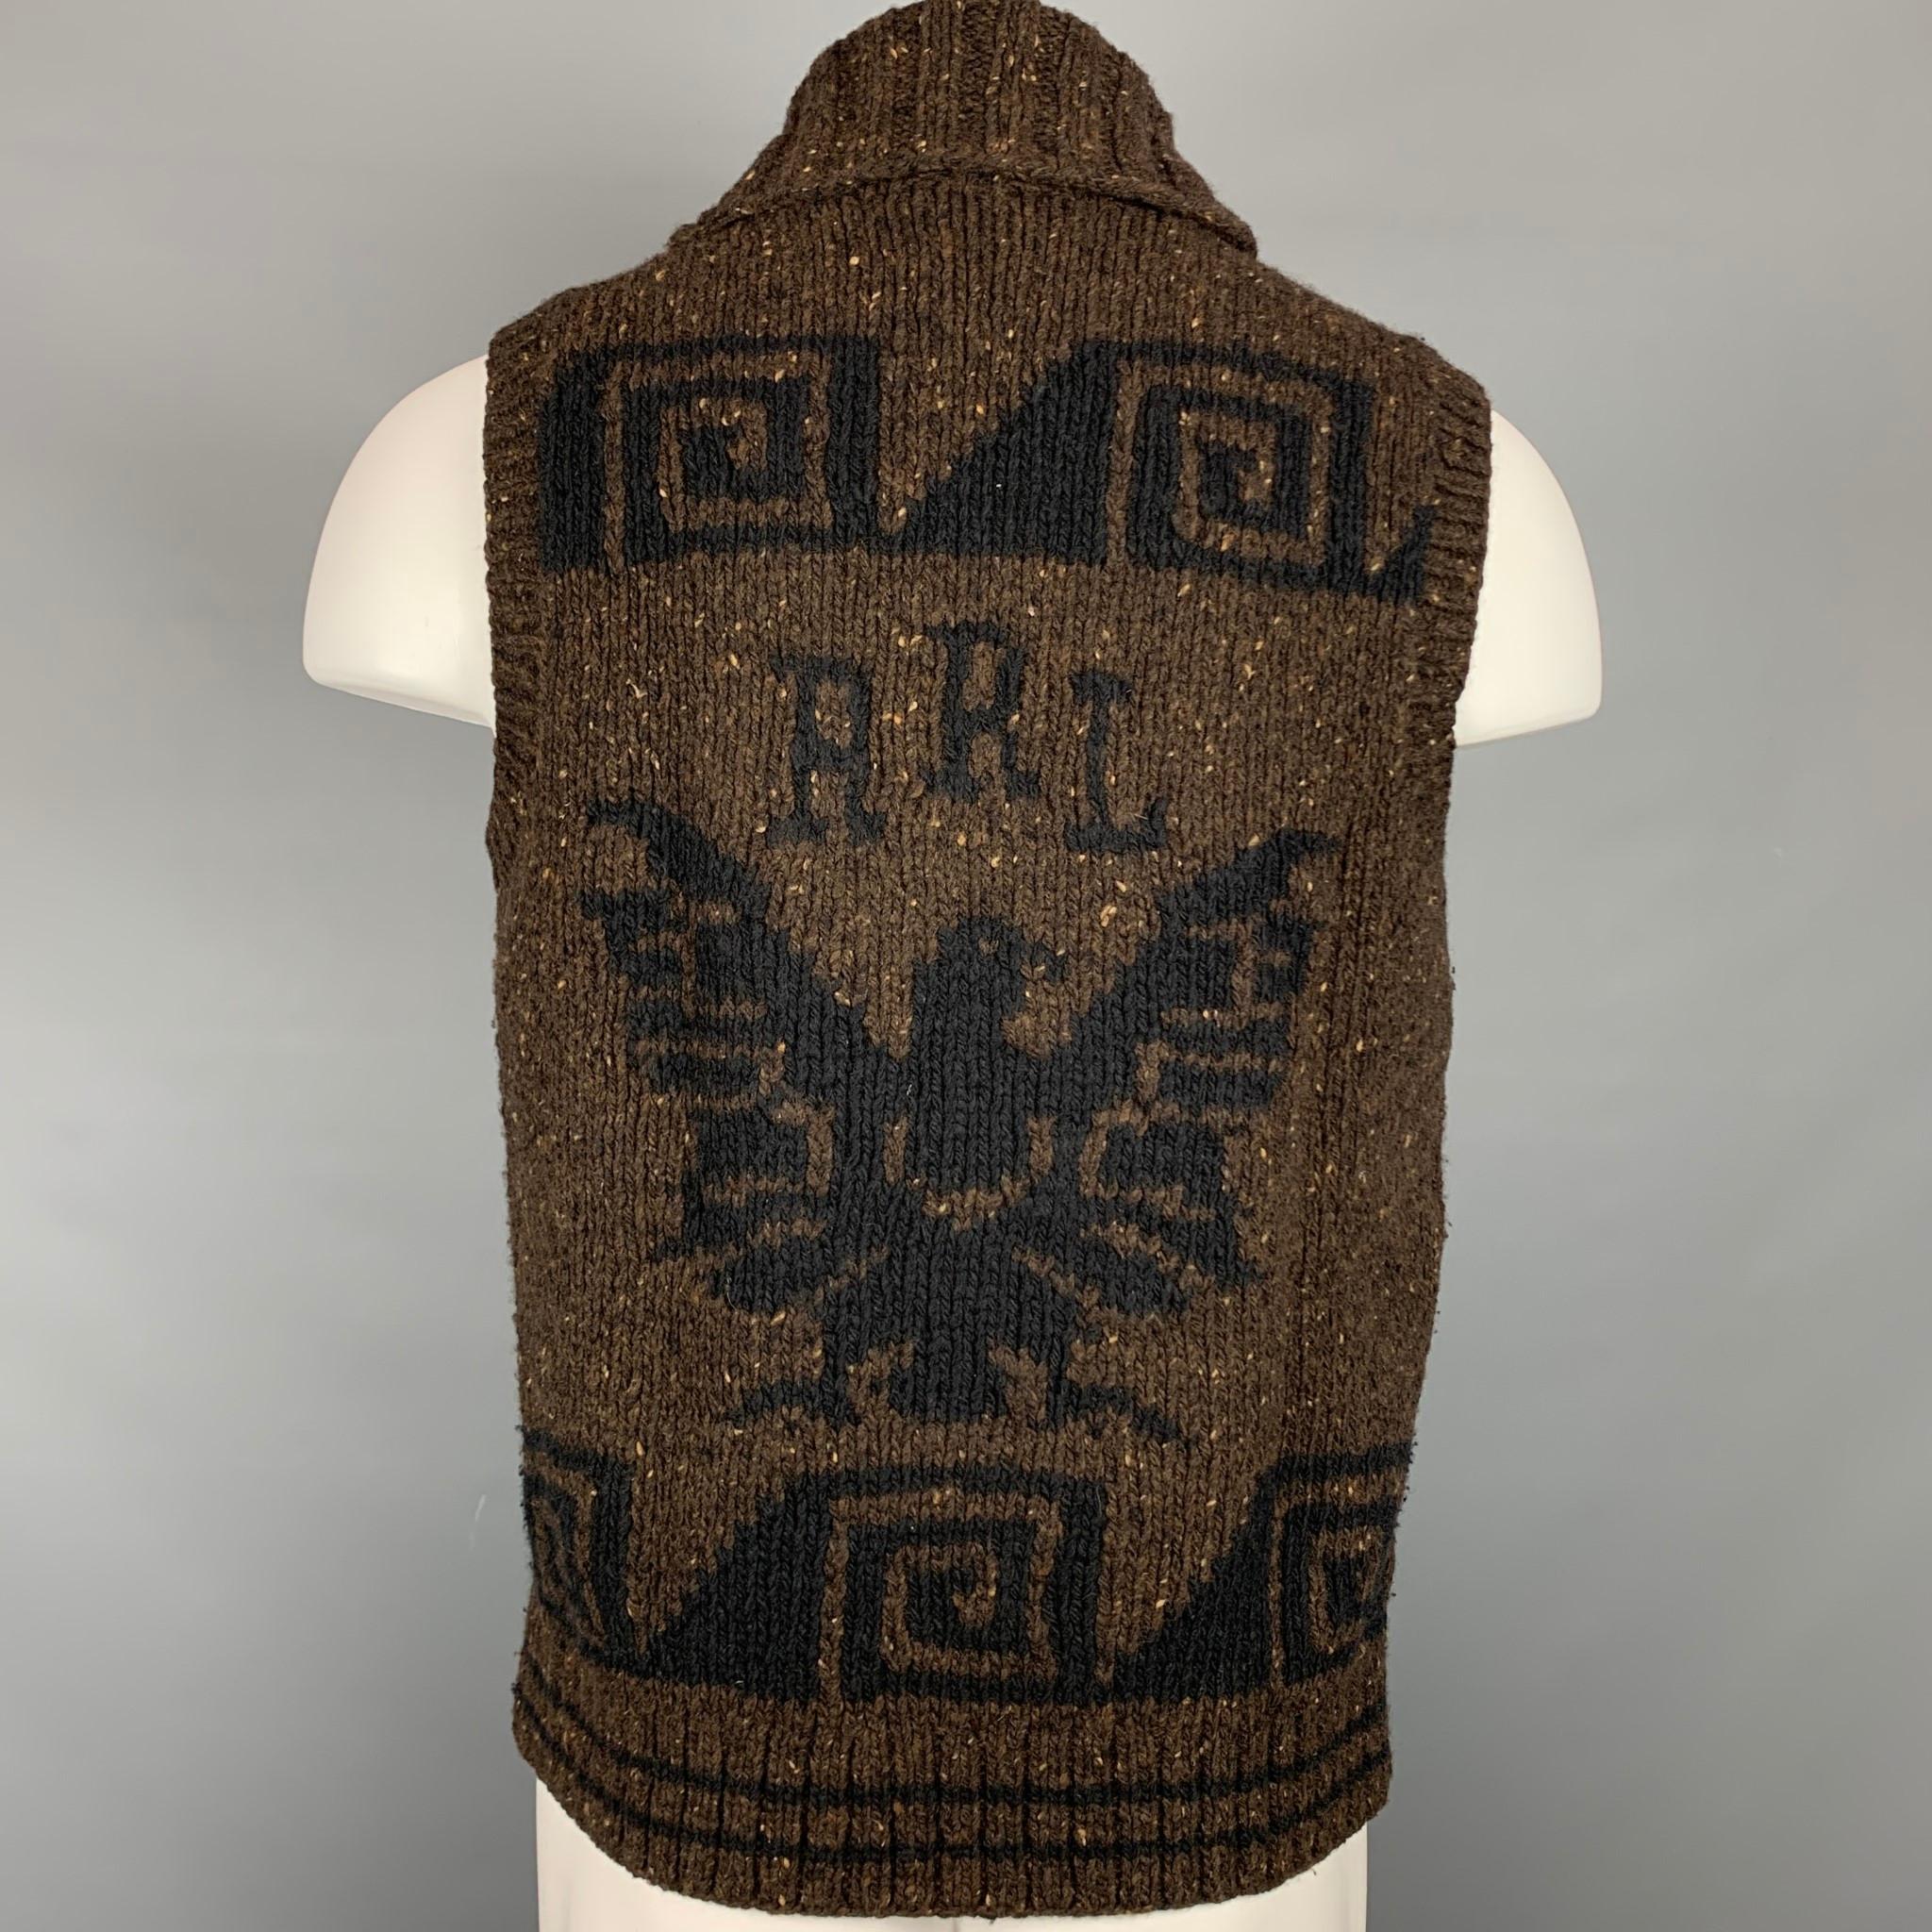 RRL by RALPH LAUREN vest comes in a brown & navy knitted wool blend featuring a wide collar, front pockets, and a full zip up closure. 

Very Good Pre-Owned Condition.
Marked: M

Measurements:

Shoulder: 14.5 in.
Chest: 42 in.
Length: 23.5 in. 